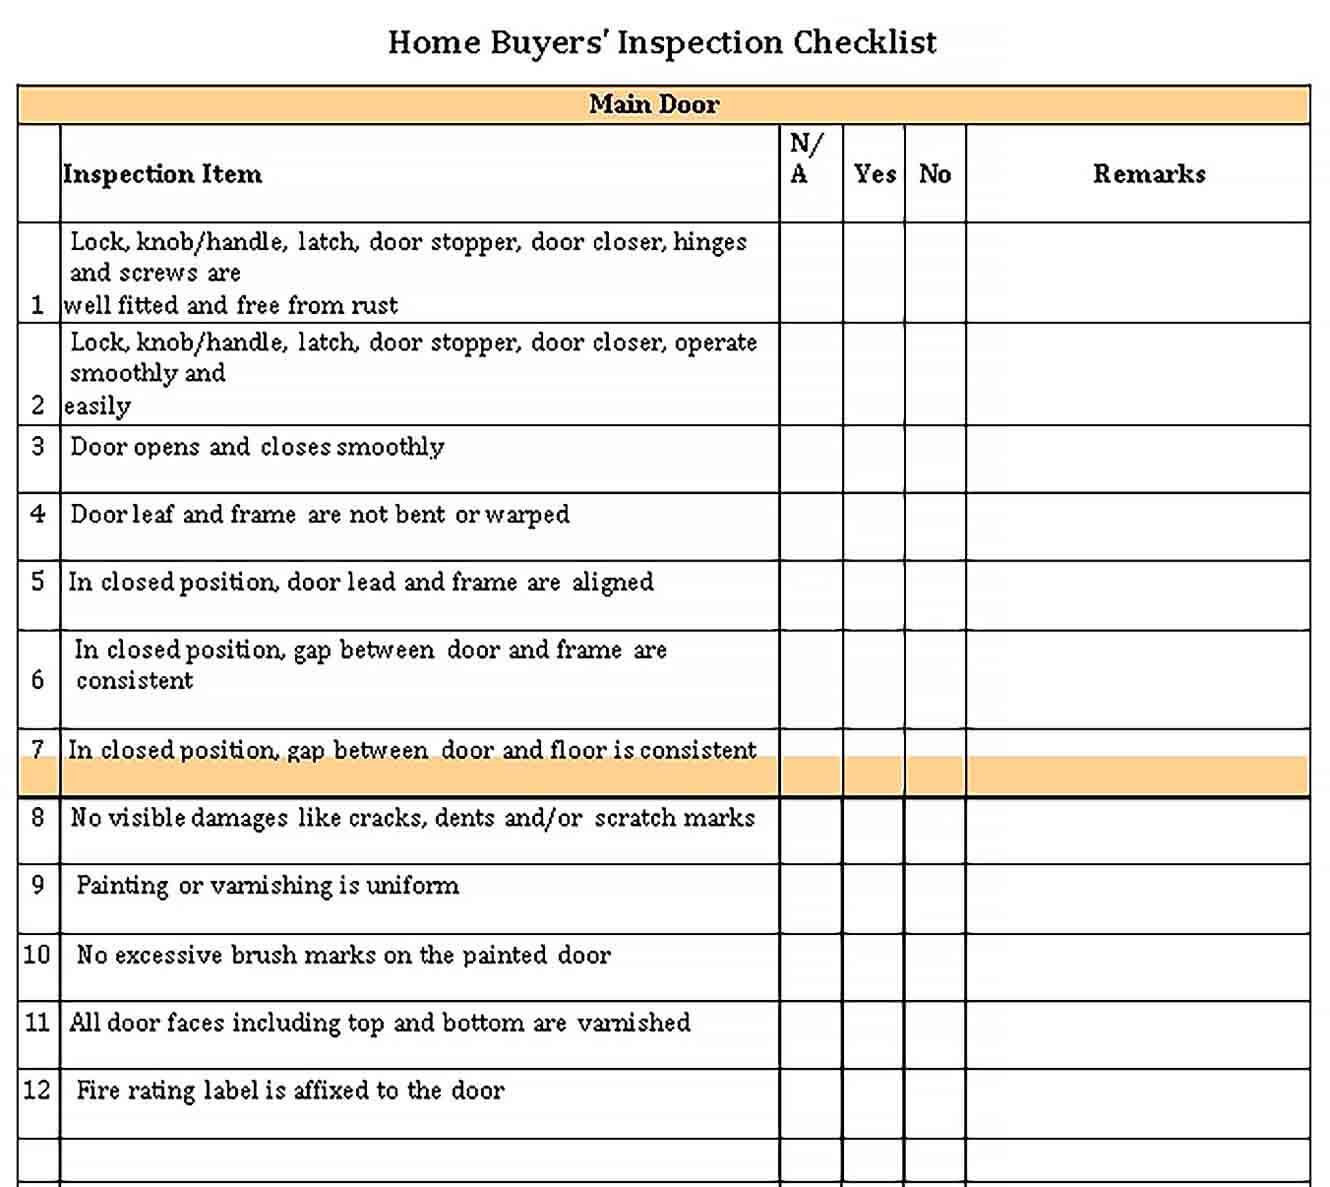 Sample Home Buyer Inspection Checklist Template